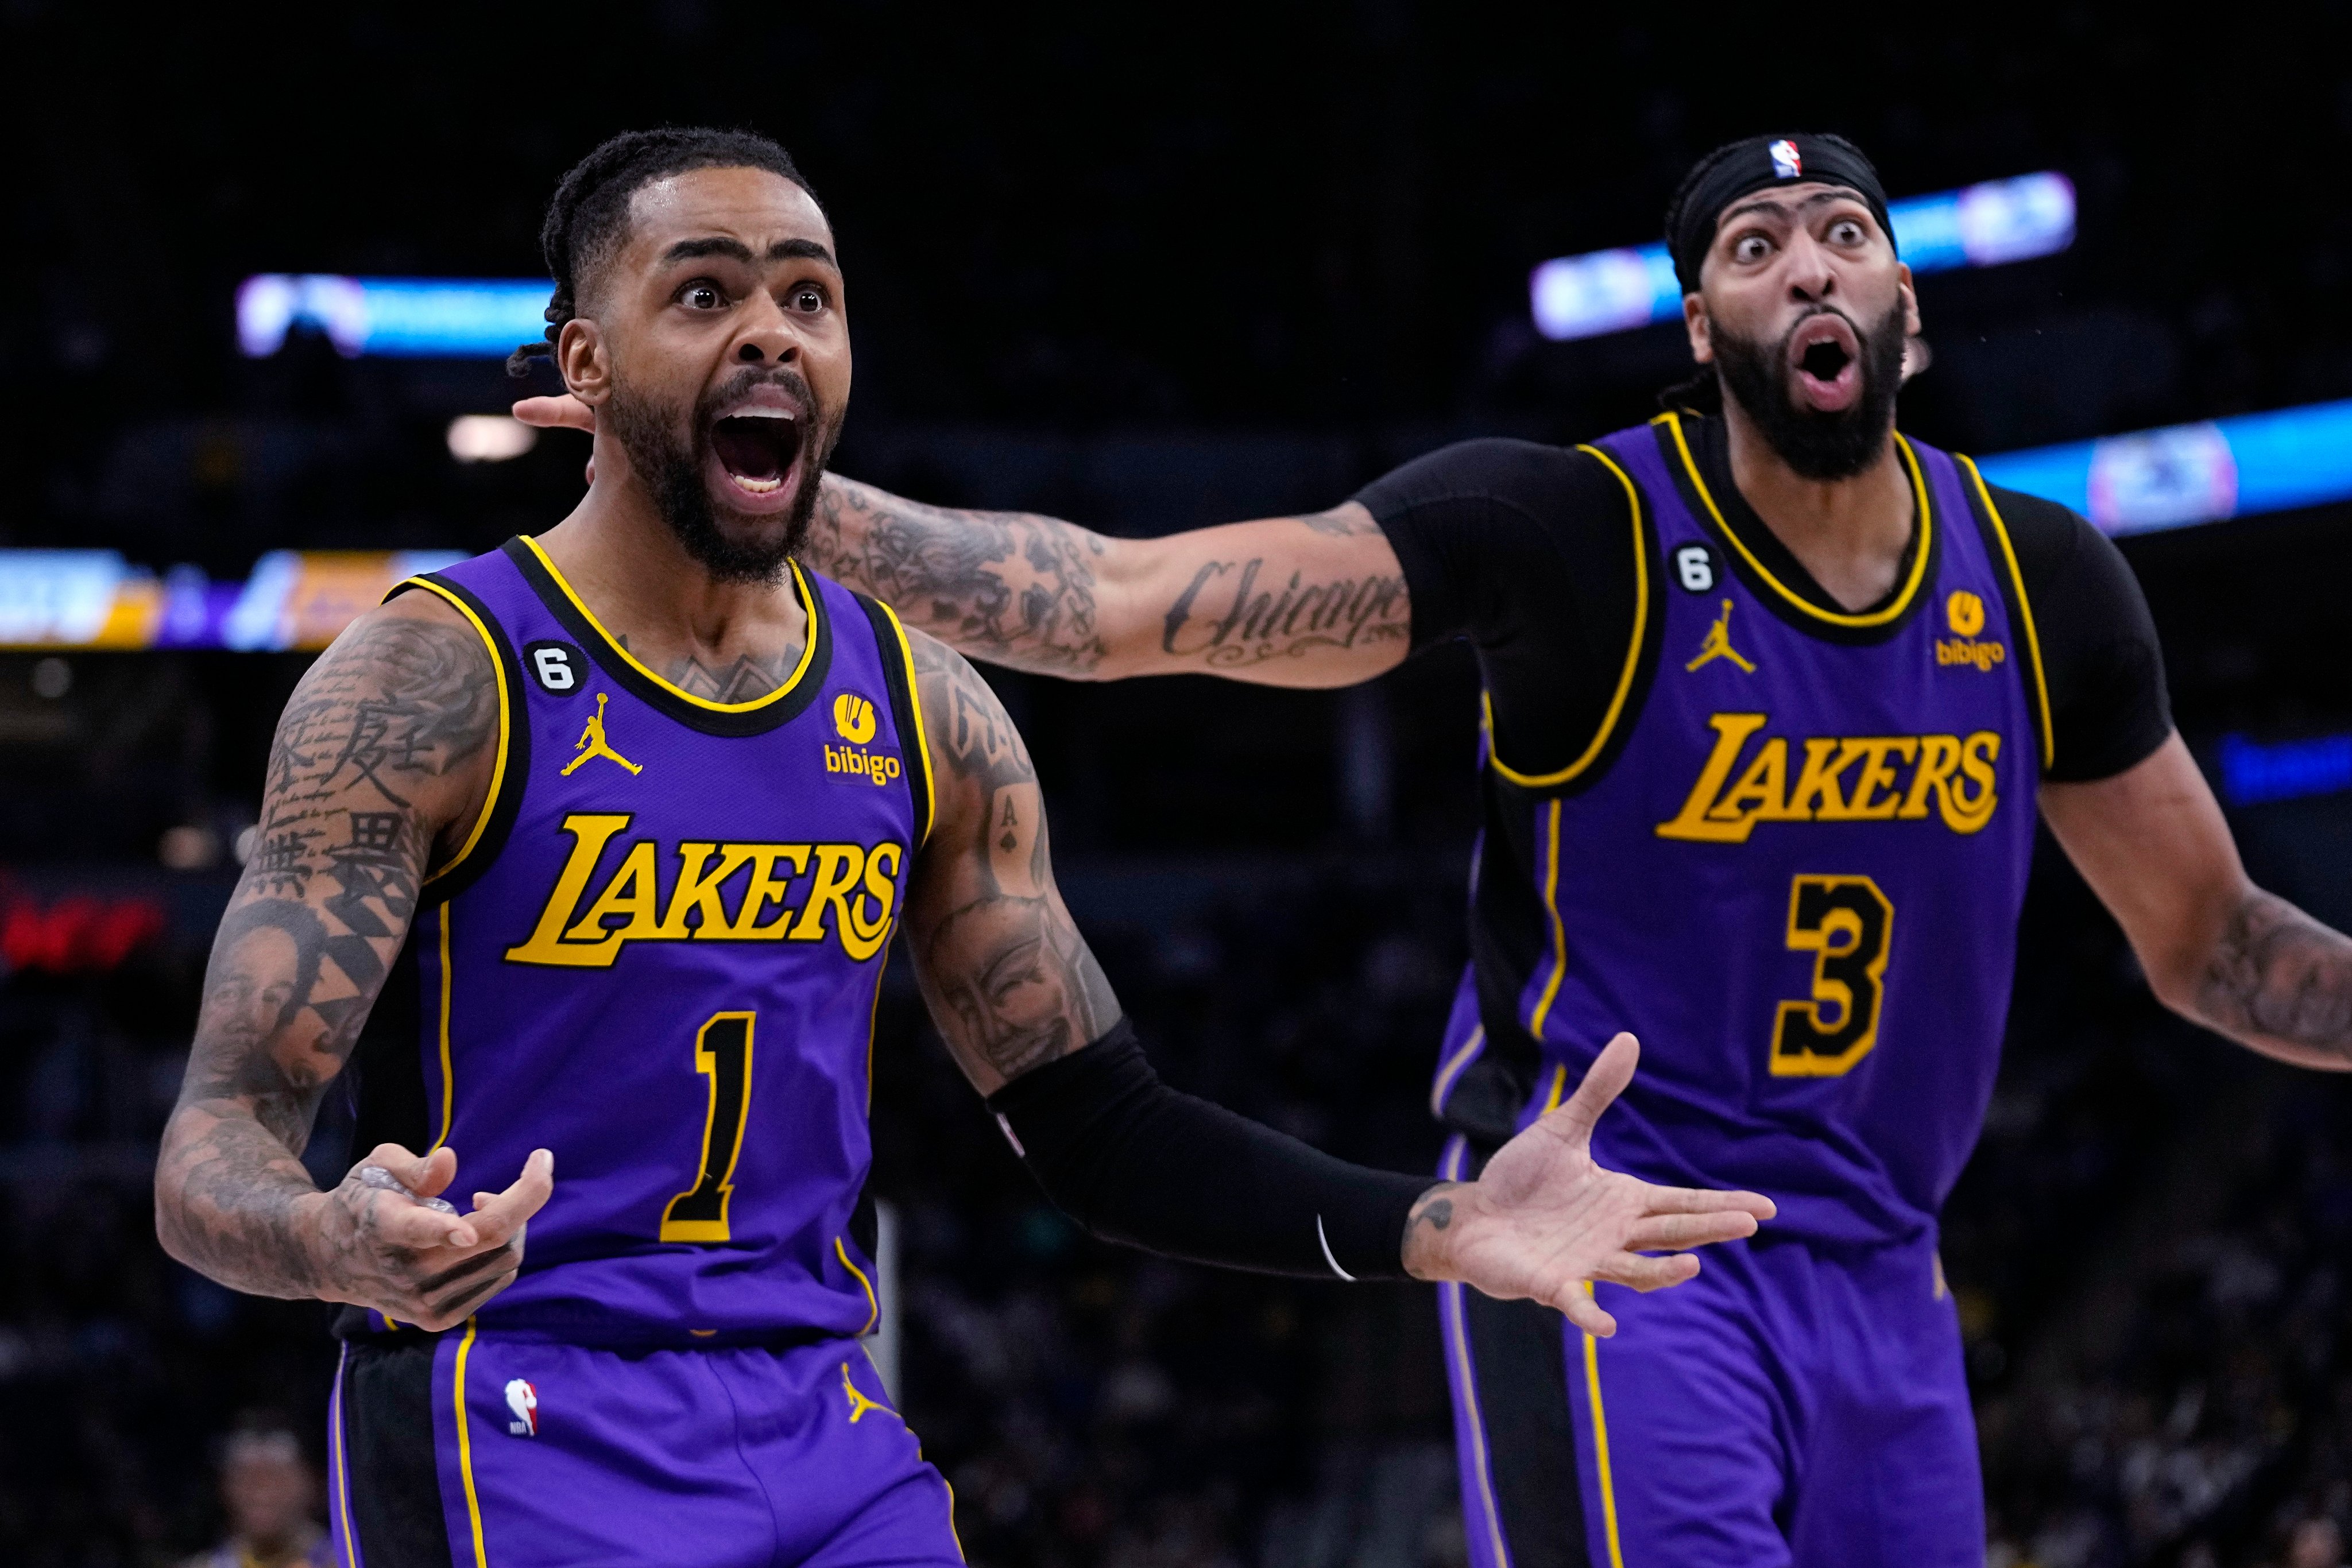 FanDuel on X: "Anthony Davis and D'Angelo Russell in the first half: 4  points 2/10 FG 3 turnovers Lakers lead by 2 at half after being up as much  as 15 on